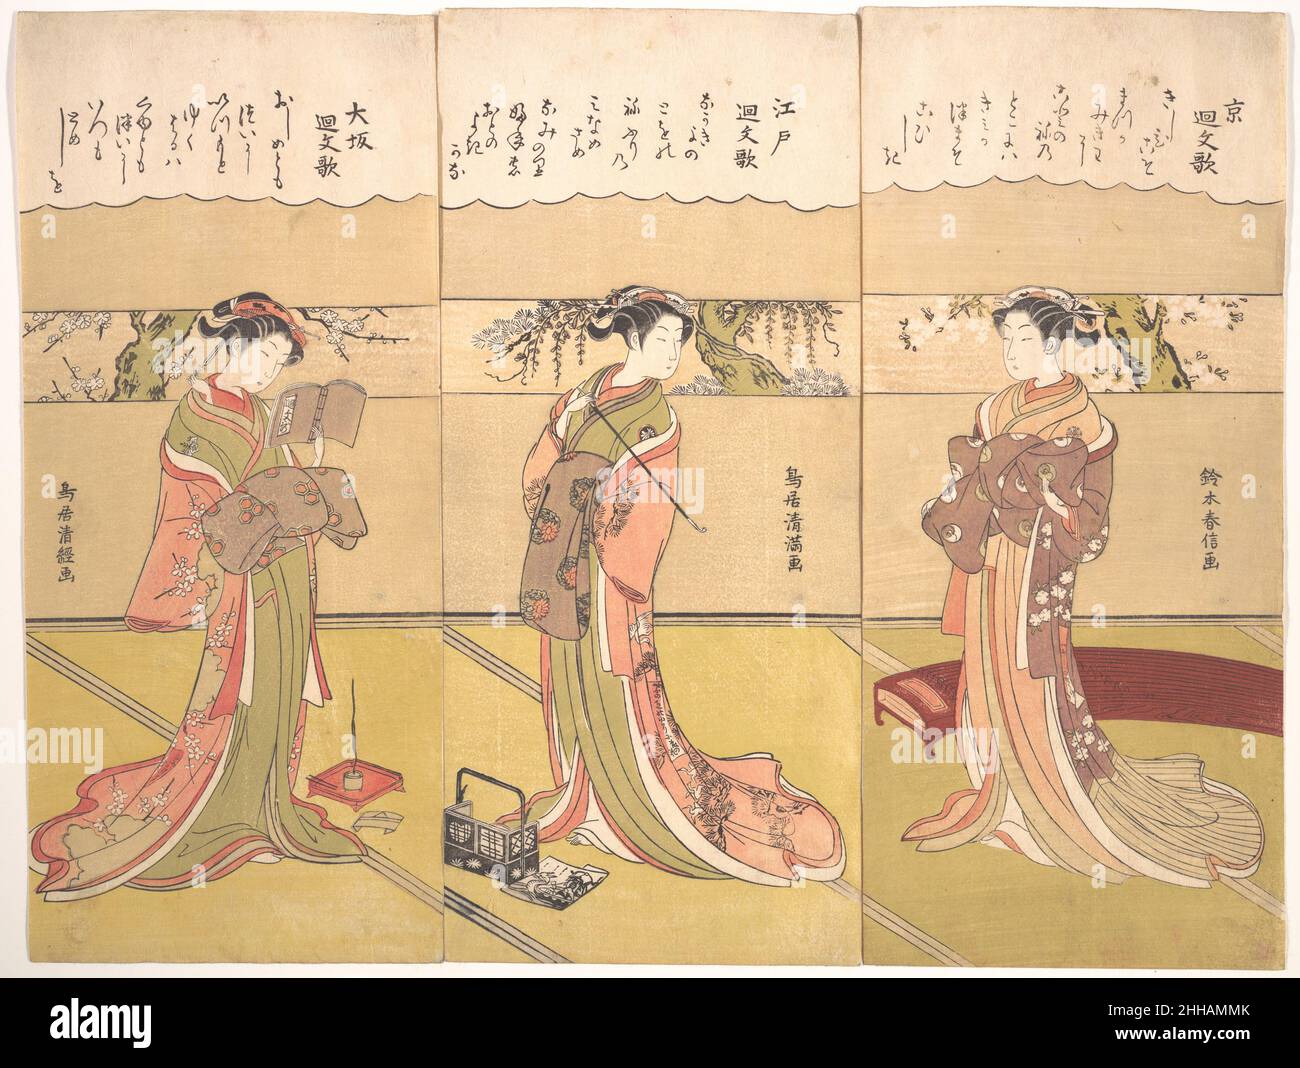 Palindromic Poems (Kaibunka): Kyo ca. 1768 Suzuki Harunobu Japanese In the right-hand section of this triptych the actor Nakamura Tomijūrō stands in front of a koto. A cherry tree blossoms outside. The palindrome above reads:Kishihi kosomatsu ka mikiwa nikoto no ne notoko ni wa kimi katsuma zo kohishikiAs in times past, waiting, the pine on the shore, true as the sound of a koto's strings you are as dear to me as a wife.This triptych of three famous onnagata Kabuki actors, each posed representing one of the major cities in Japan, cities that were centers of merchant culture, is a tour de force Stock Photo